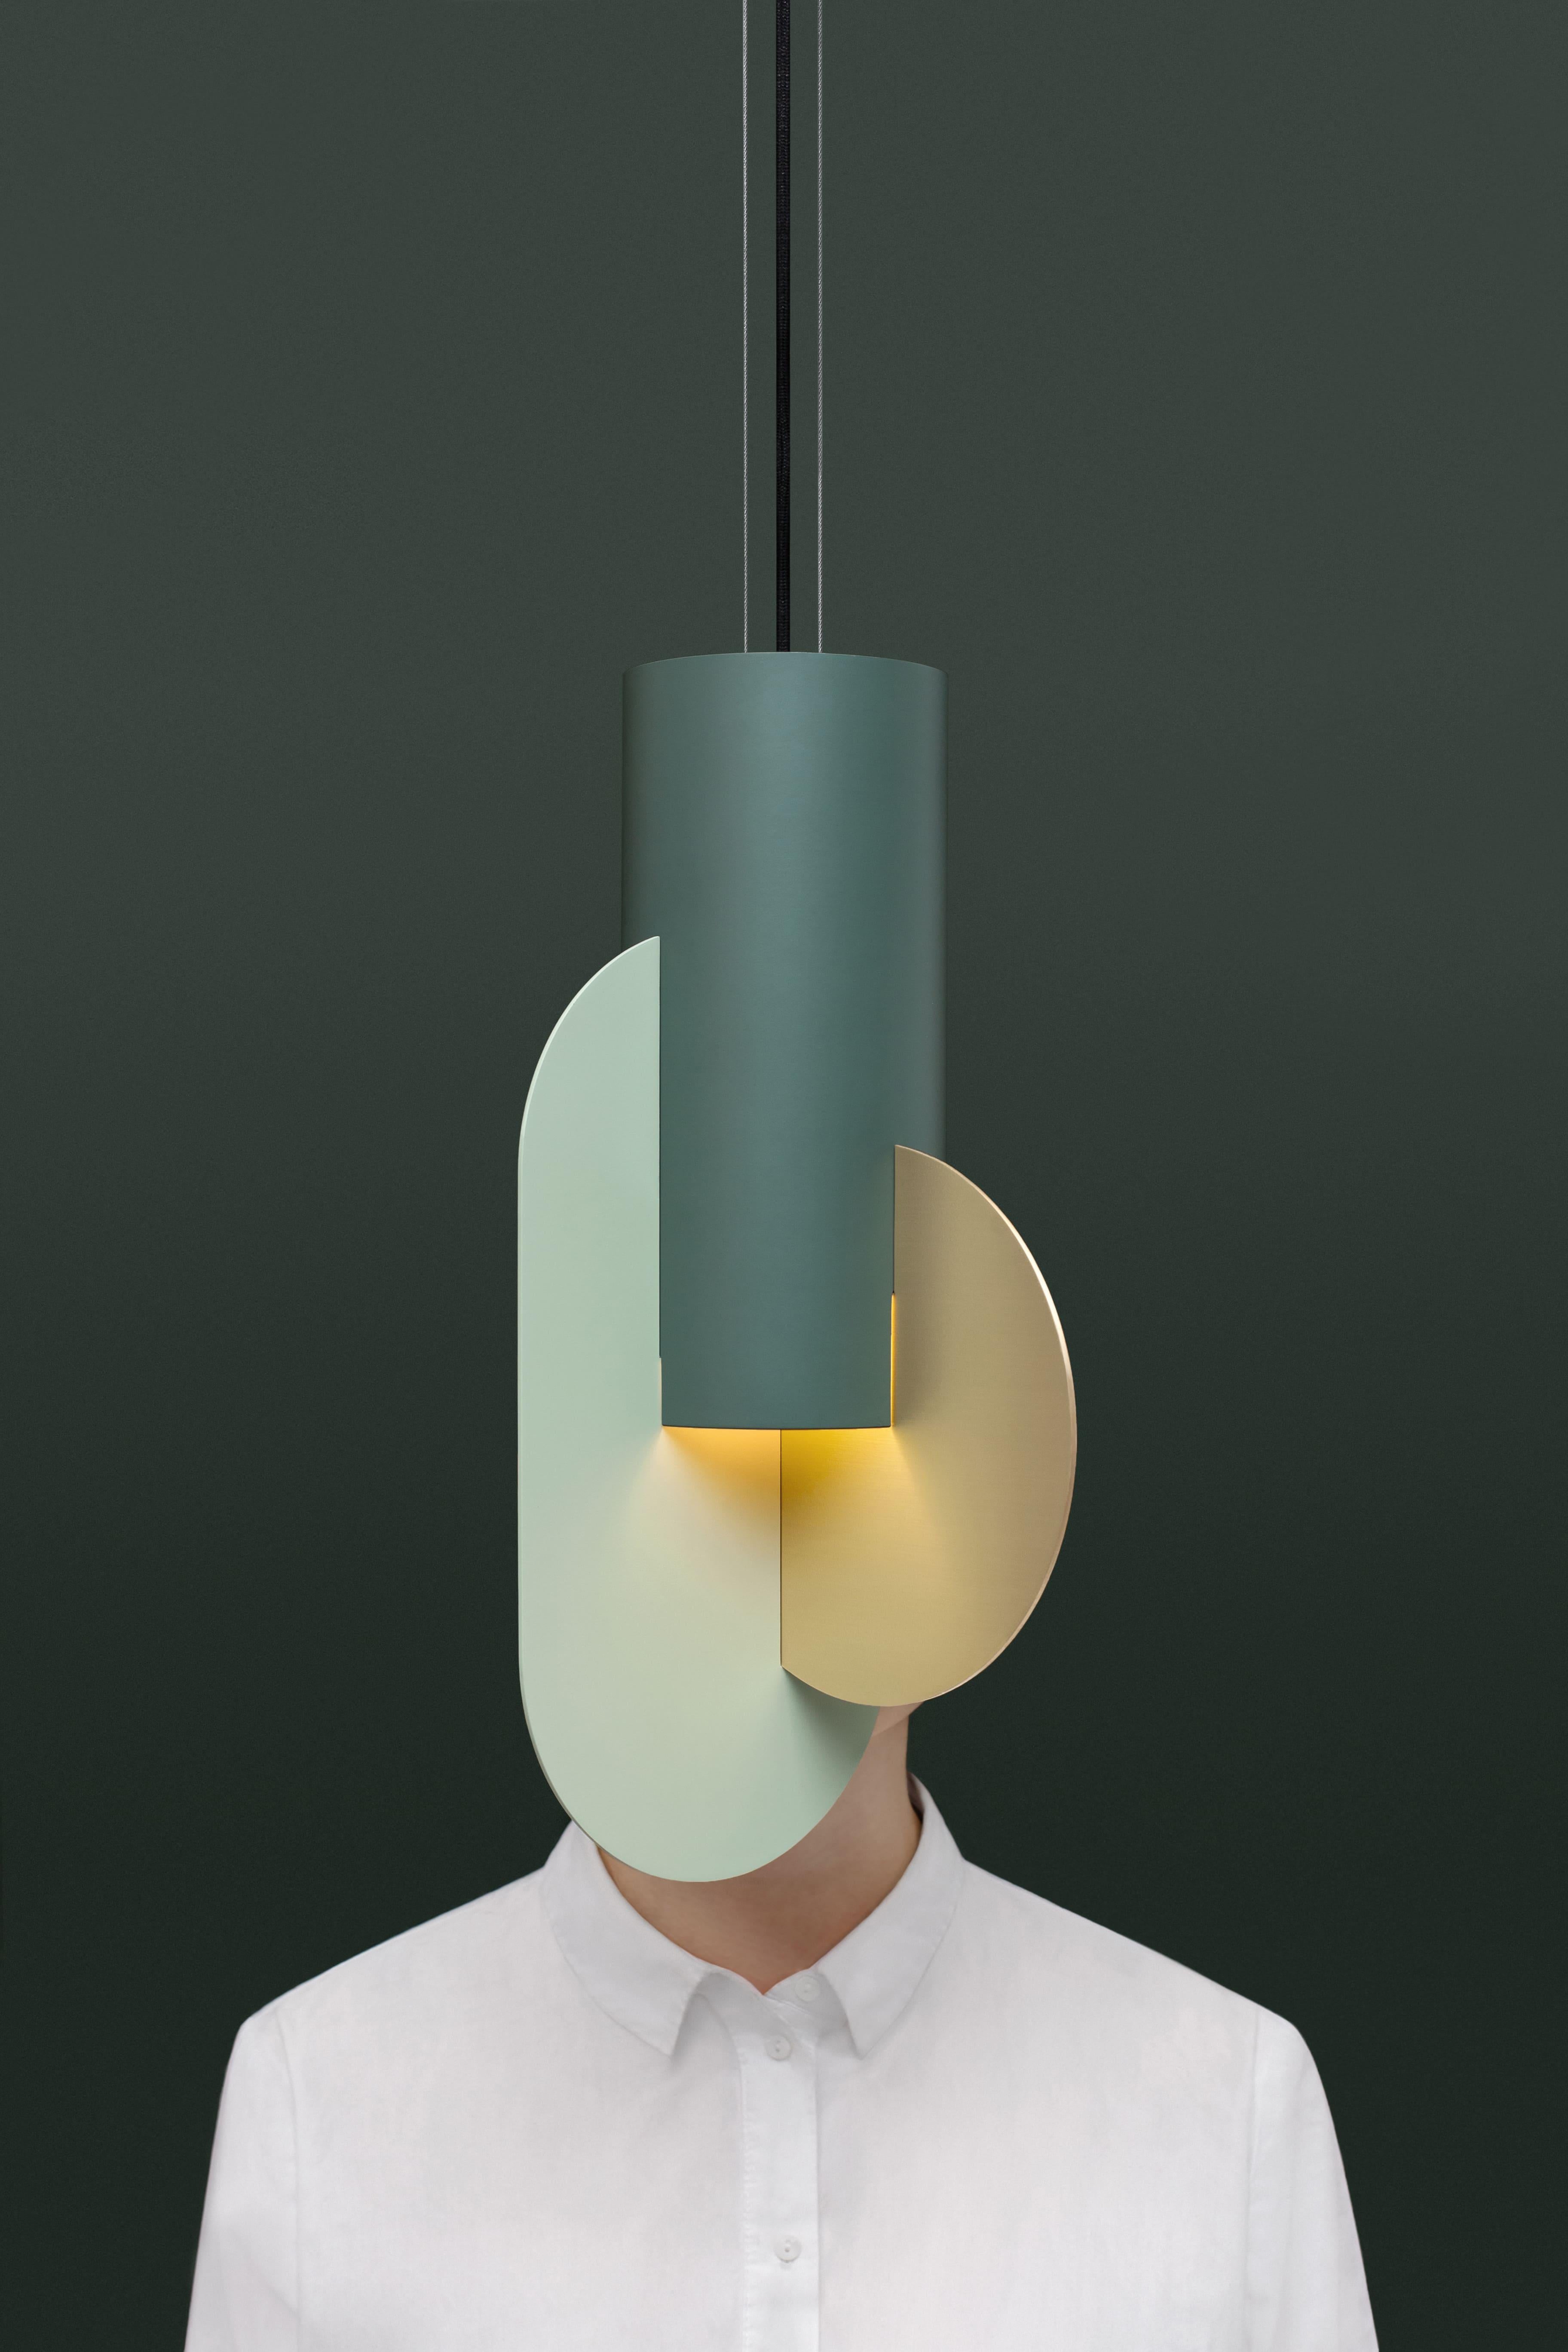 Ukrainian Set of Three Contemporary Pendant Lamps Suprematic CS5 by NOOM in Brass & Steel